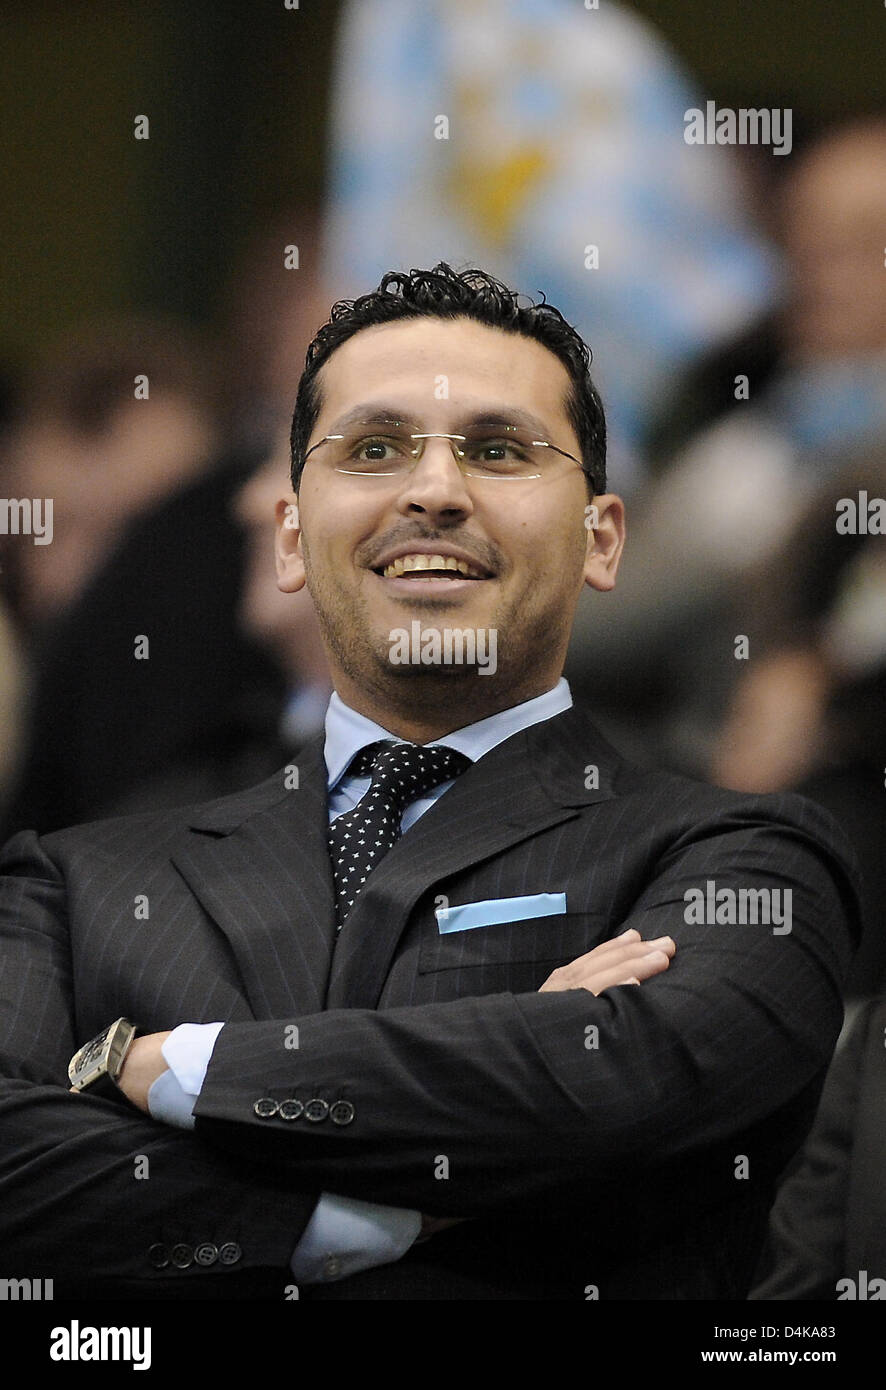 Khaldun al-Mubarak, chairman and owner of Manchester City, pictured during the UEFA Cup quarter finals match Manchester City vs SV Hamburg at City of Manchester stadium in Manchester, United Kingdom, 16 April 2009. Manchester City defeated SV Hamburg 2-1. Photo: Marcus Brandt Stock Photo